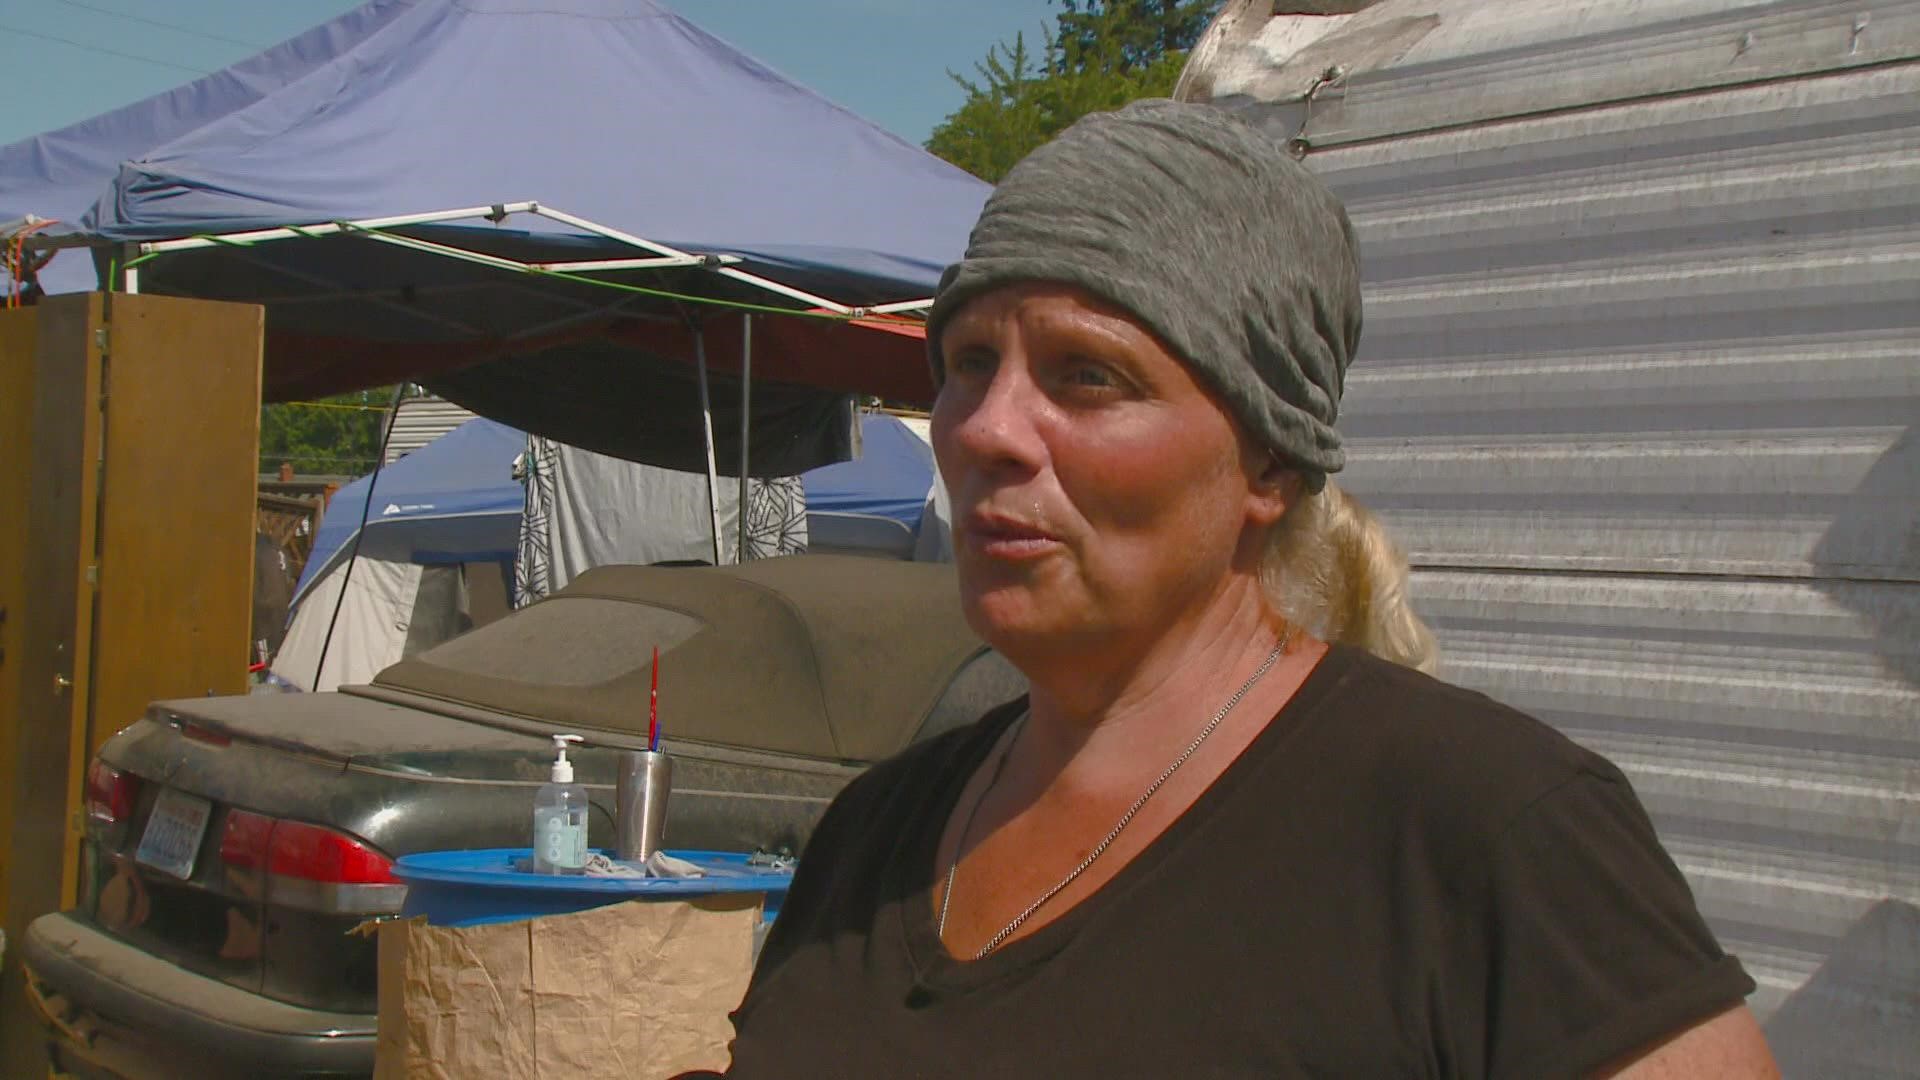 KREM 2 spoke with some of the people living at the homeless encampment near I-90 and Freya, and the reaction to the new shelter was mixed.